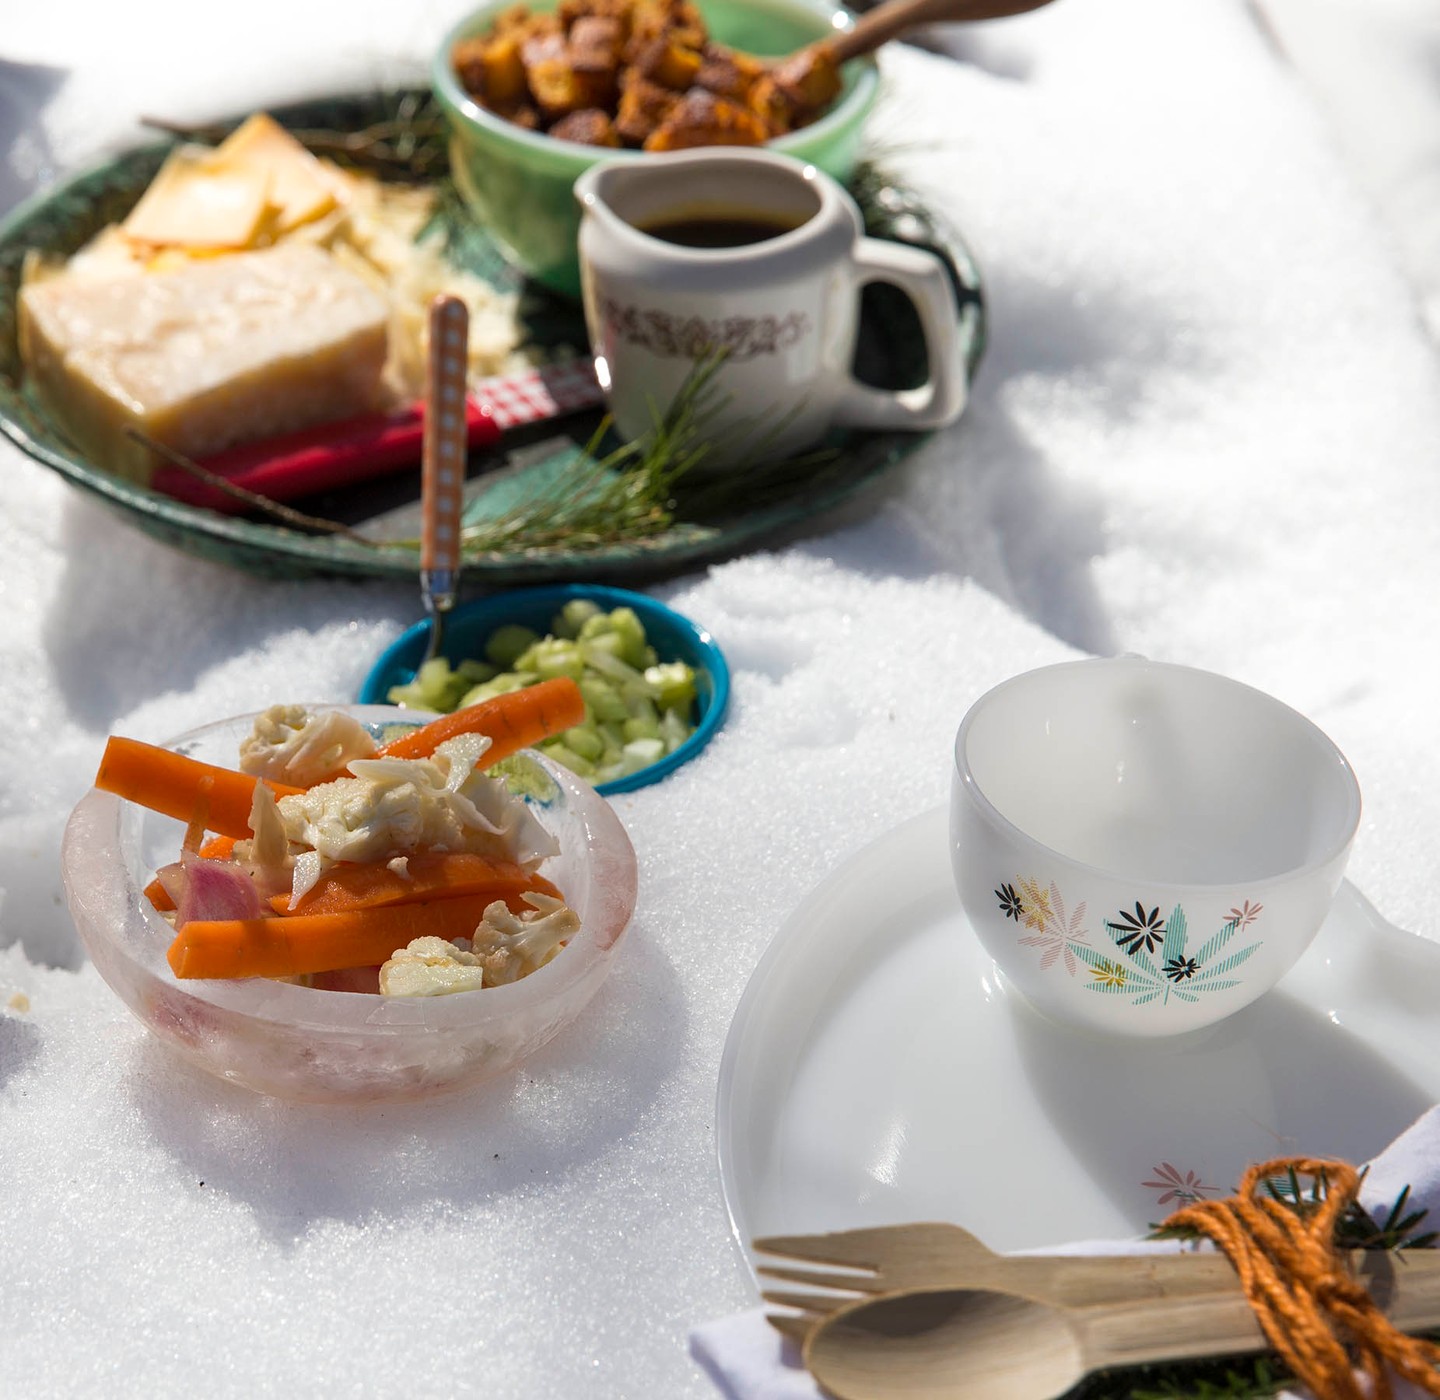 The weather forecast got us thinking about our favorite snowy activities and there’s nothing better than a snow picnic! It may sound crazy, but it’s super fun. Let Barb be your guide! Check out this blog post at the link in our bio and let us know what you’ve got planned for the wintry weekend.

@logcabincooking 

#logcabincooking #ashevillenc #asheville #snowpicnic #picnic #celerysoup #soup #cornbread #appalachiancooking #appalachia #croutons #snowinappalachia #winterpicnic #nativeground #brownbutter #linkinbio